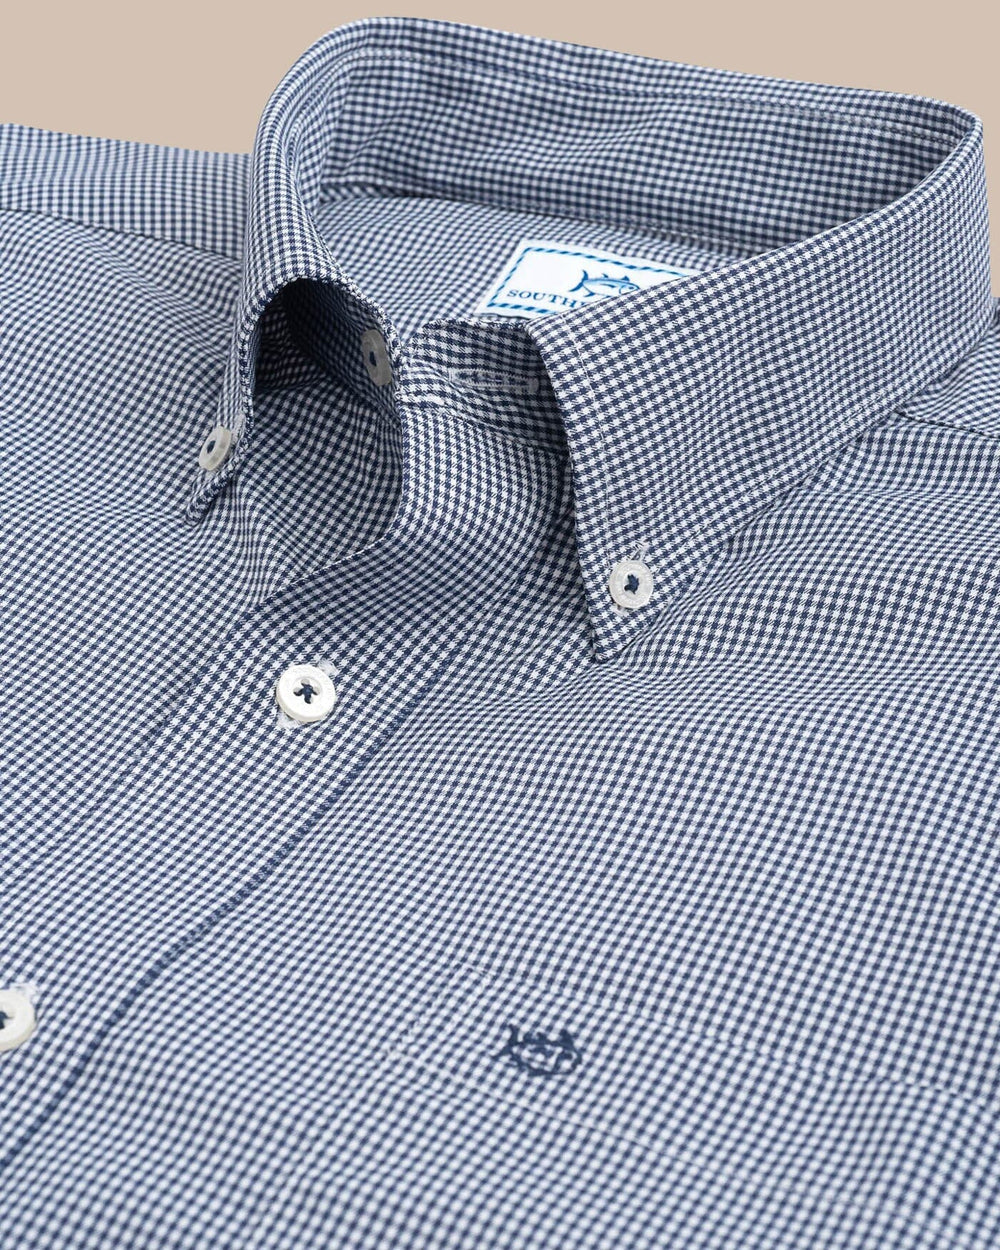 The collar of the Men's Navy Micro Gingham Intercoastal Performance Sport Shirt by Southern Tide - True Navy